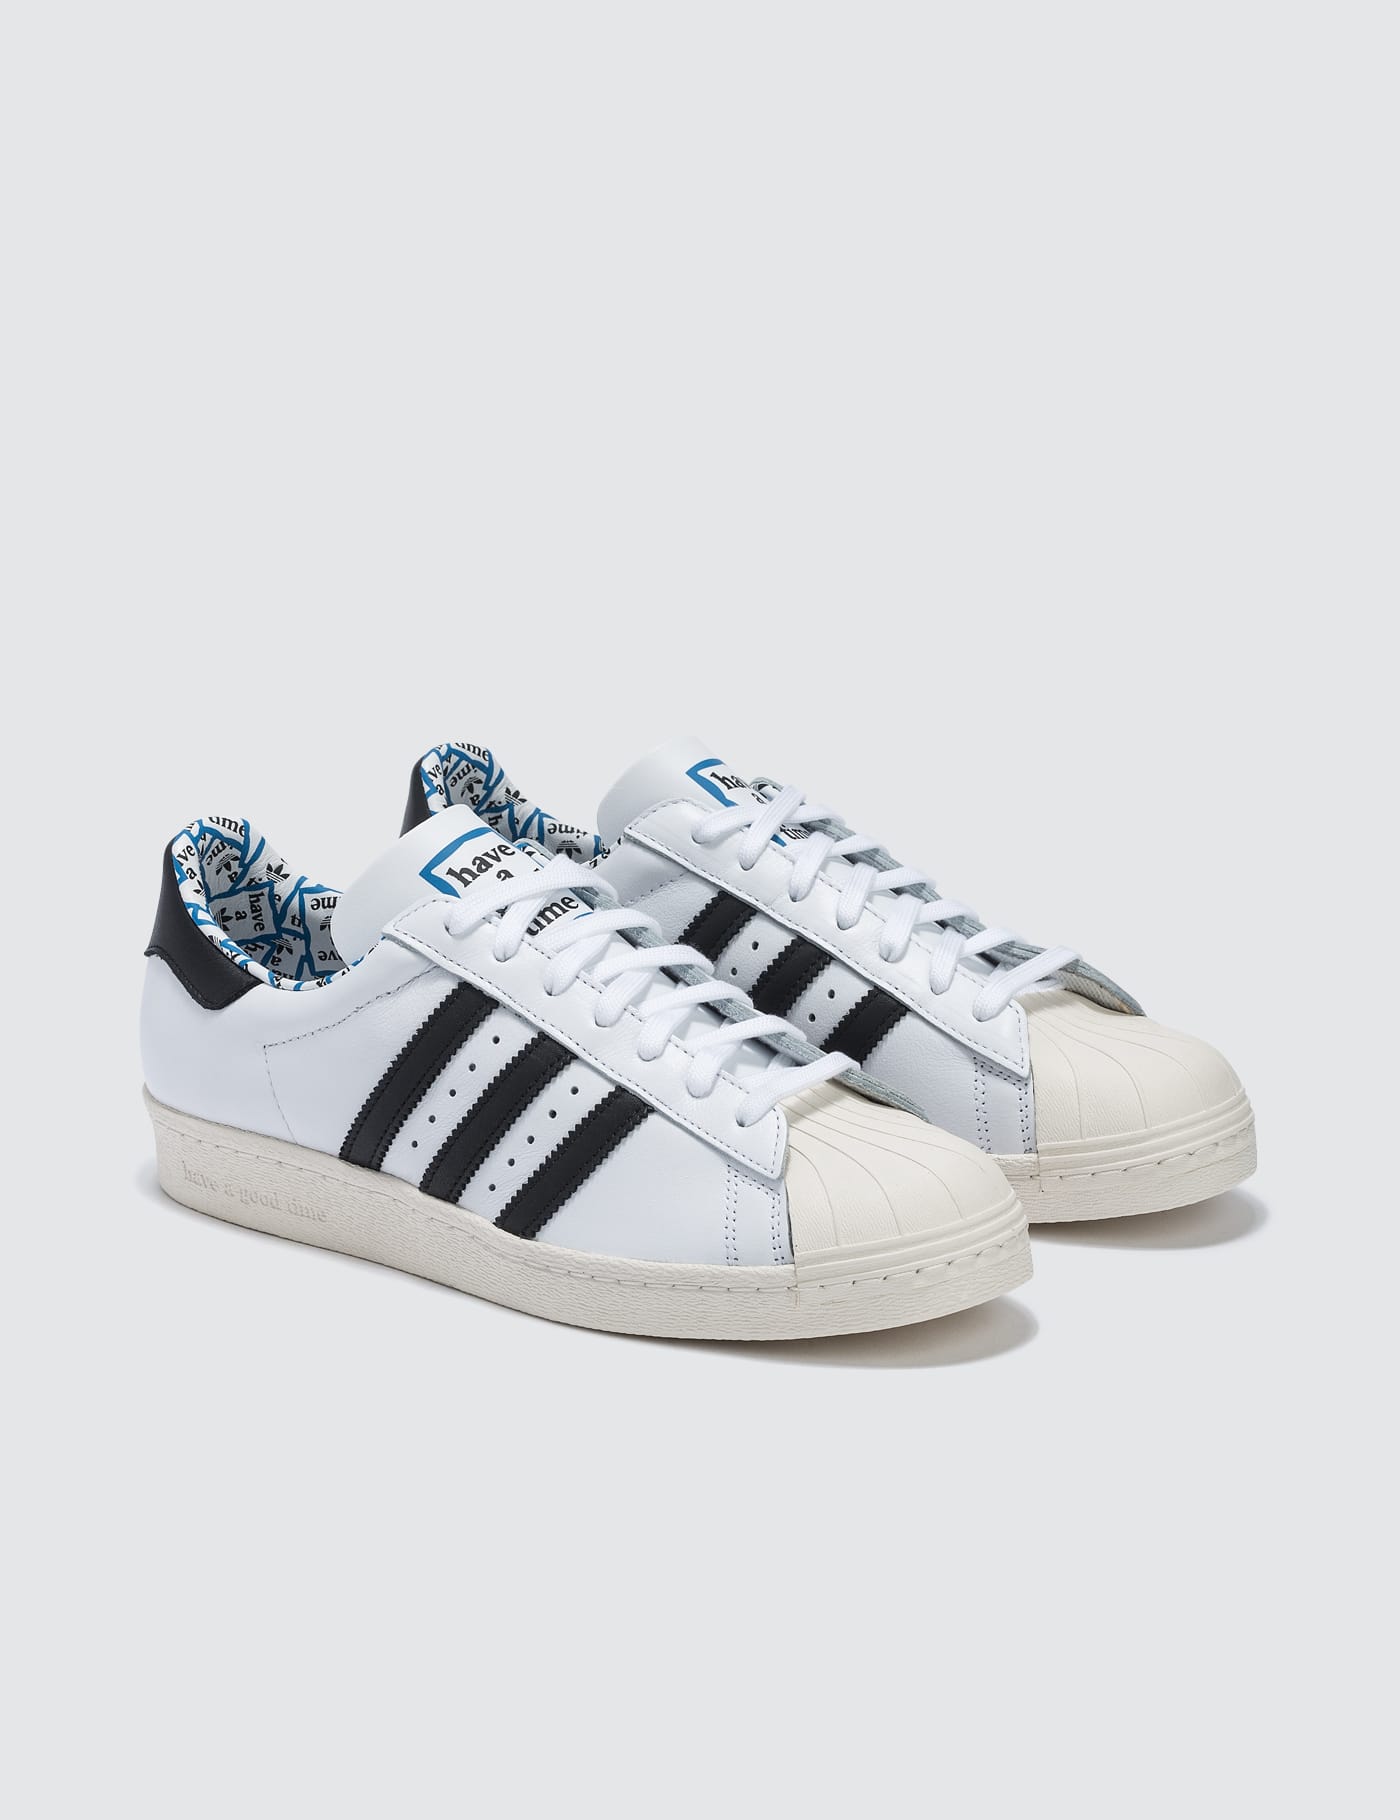 adidas superstar 80s x have a good time